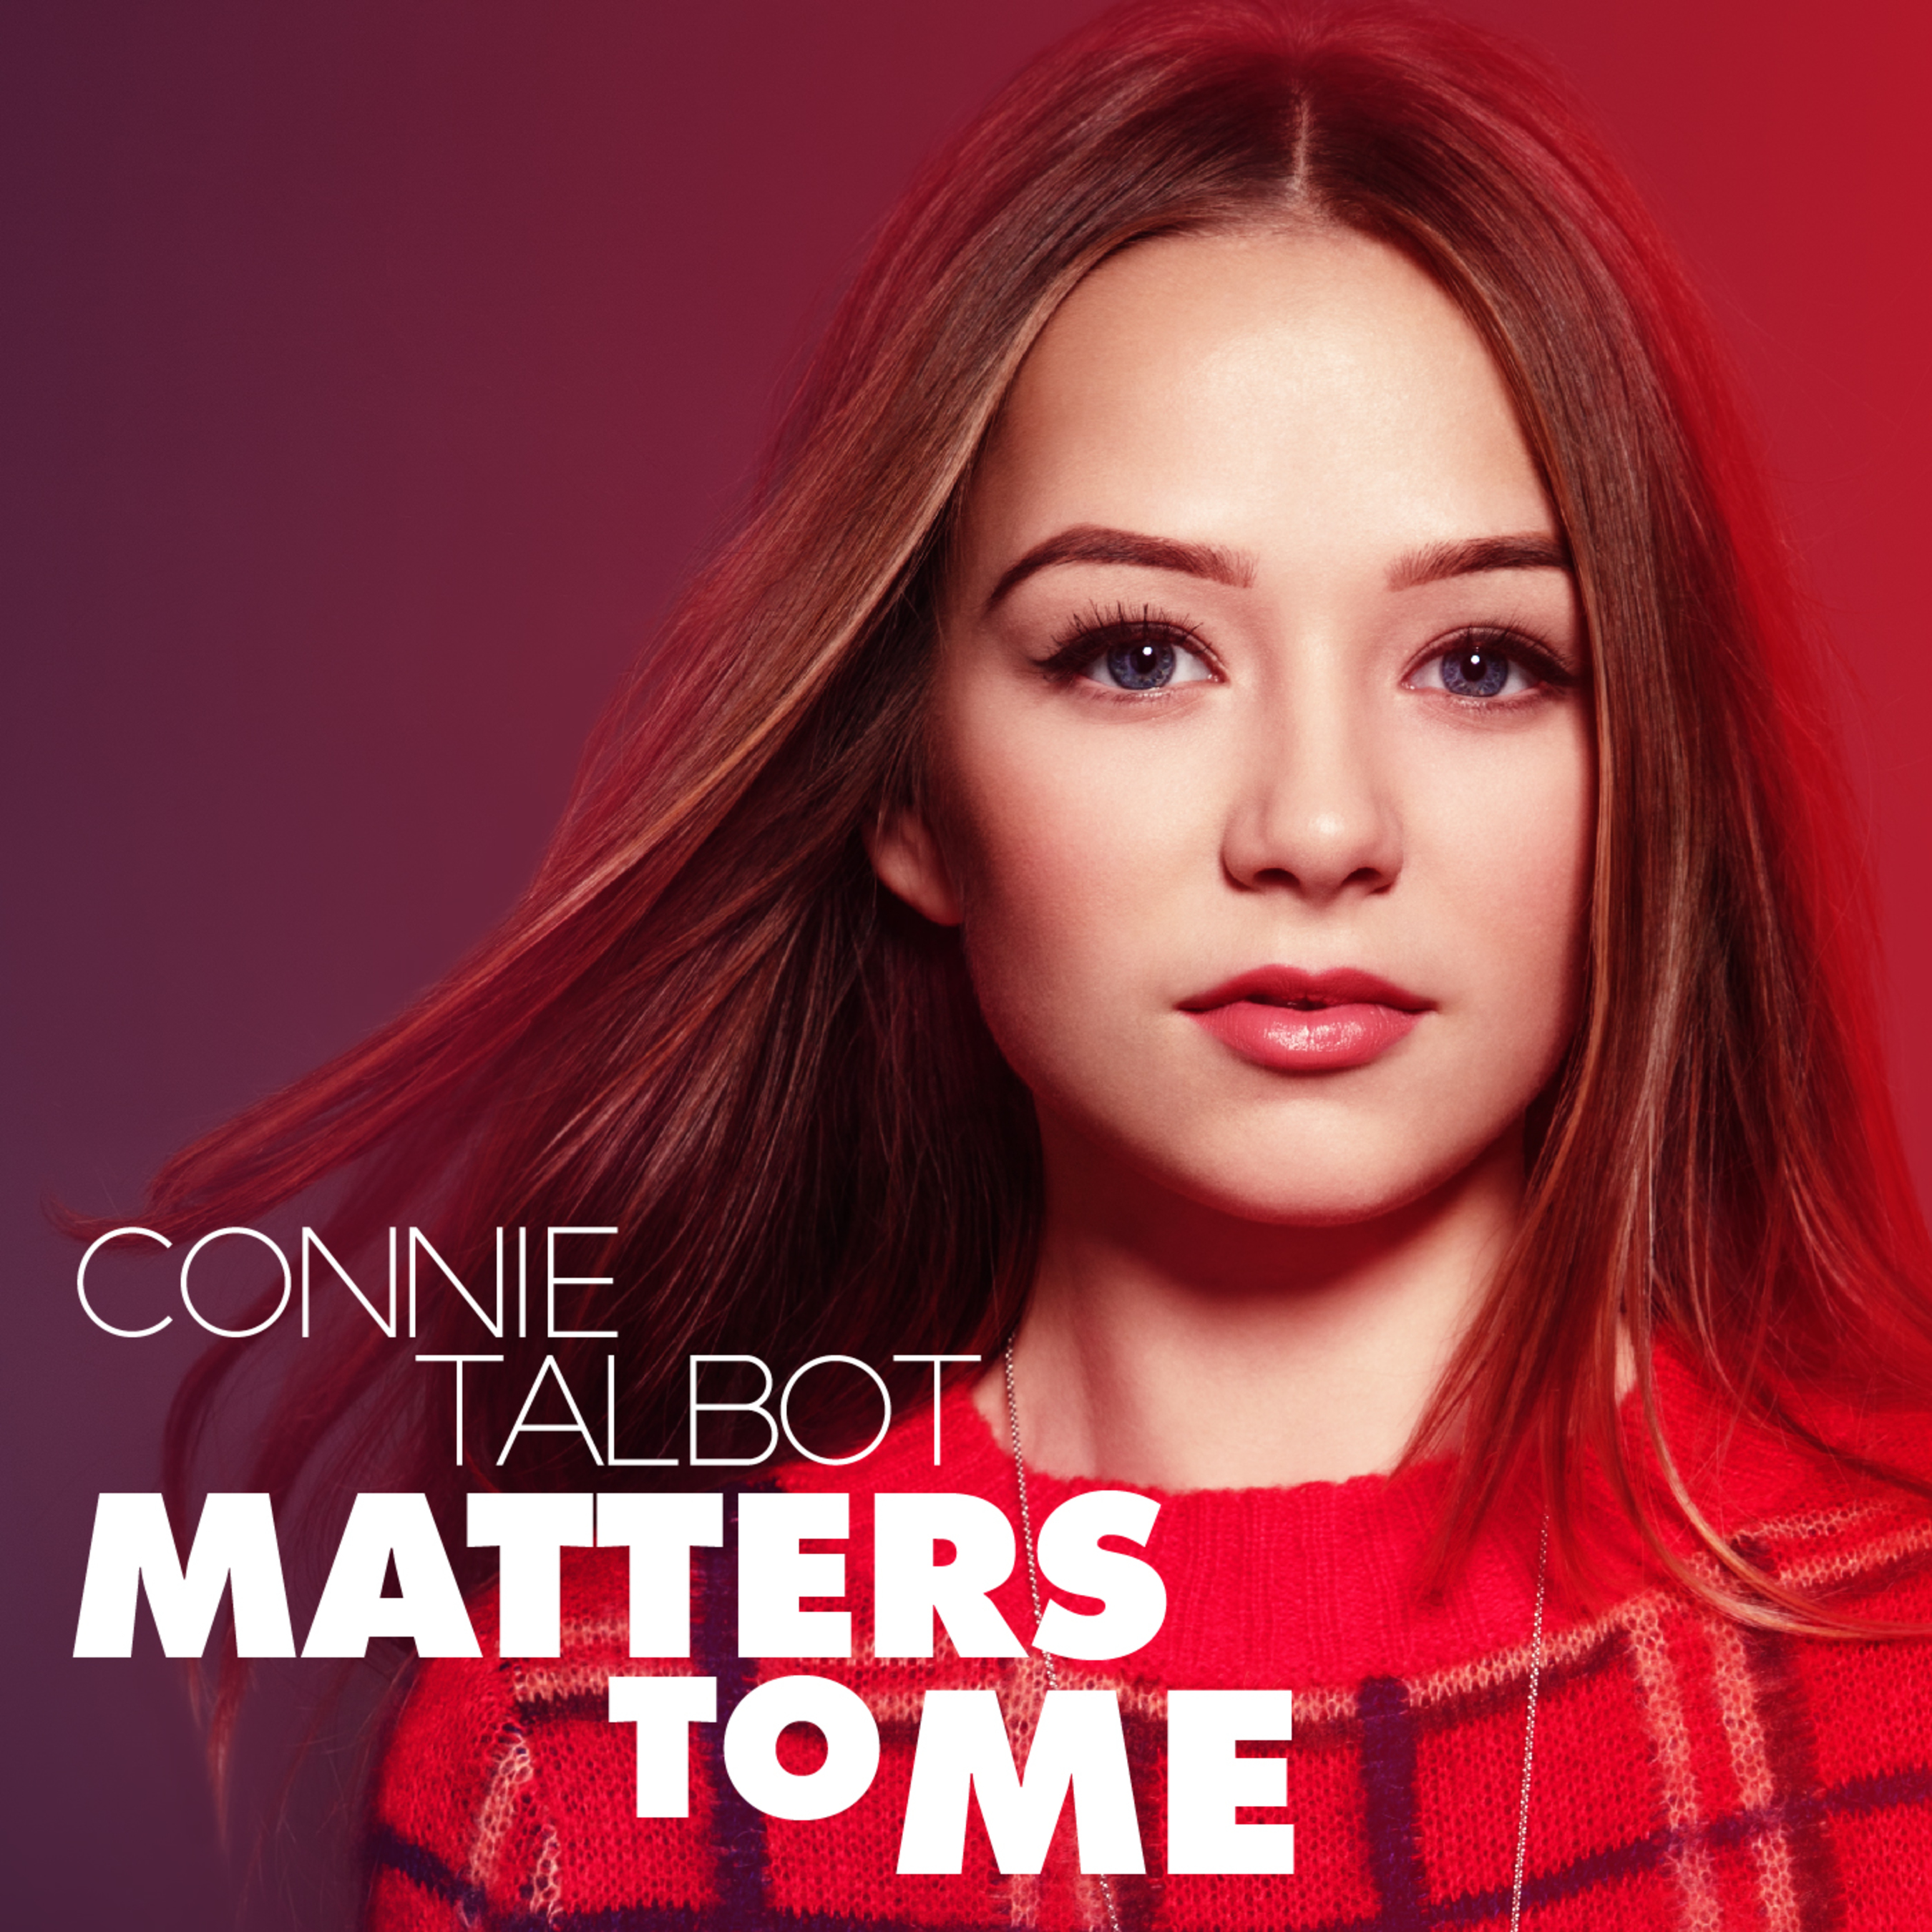 Connie Talbot releases her fifth studio album Matters To Me